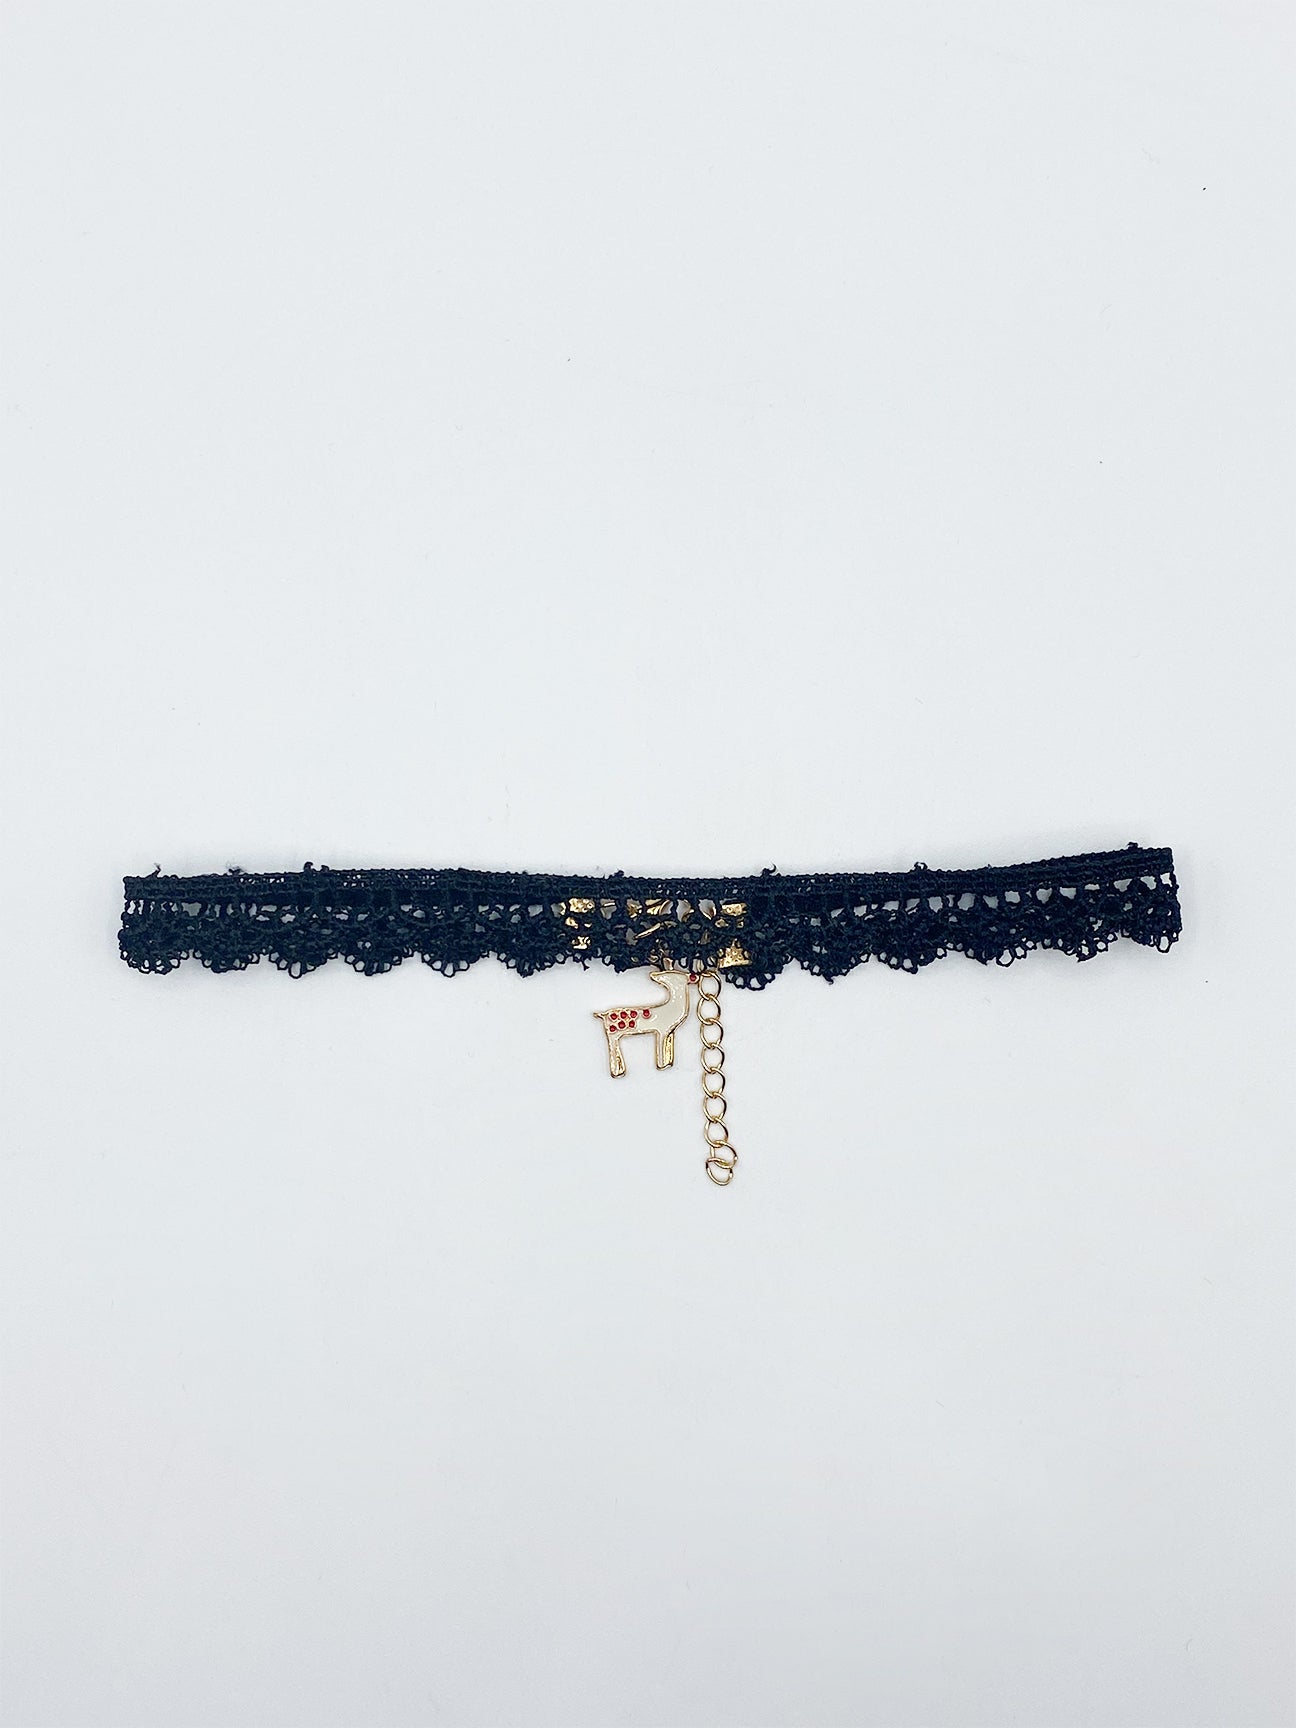 Black Lace Choker With Reindeer Charm